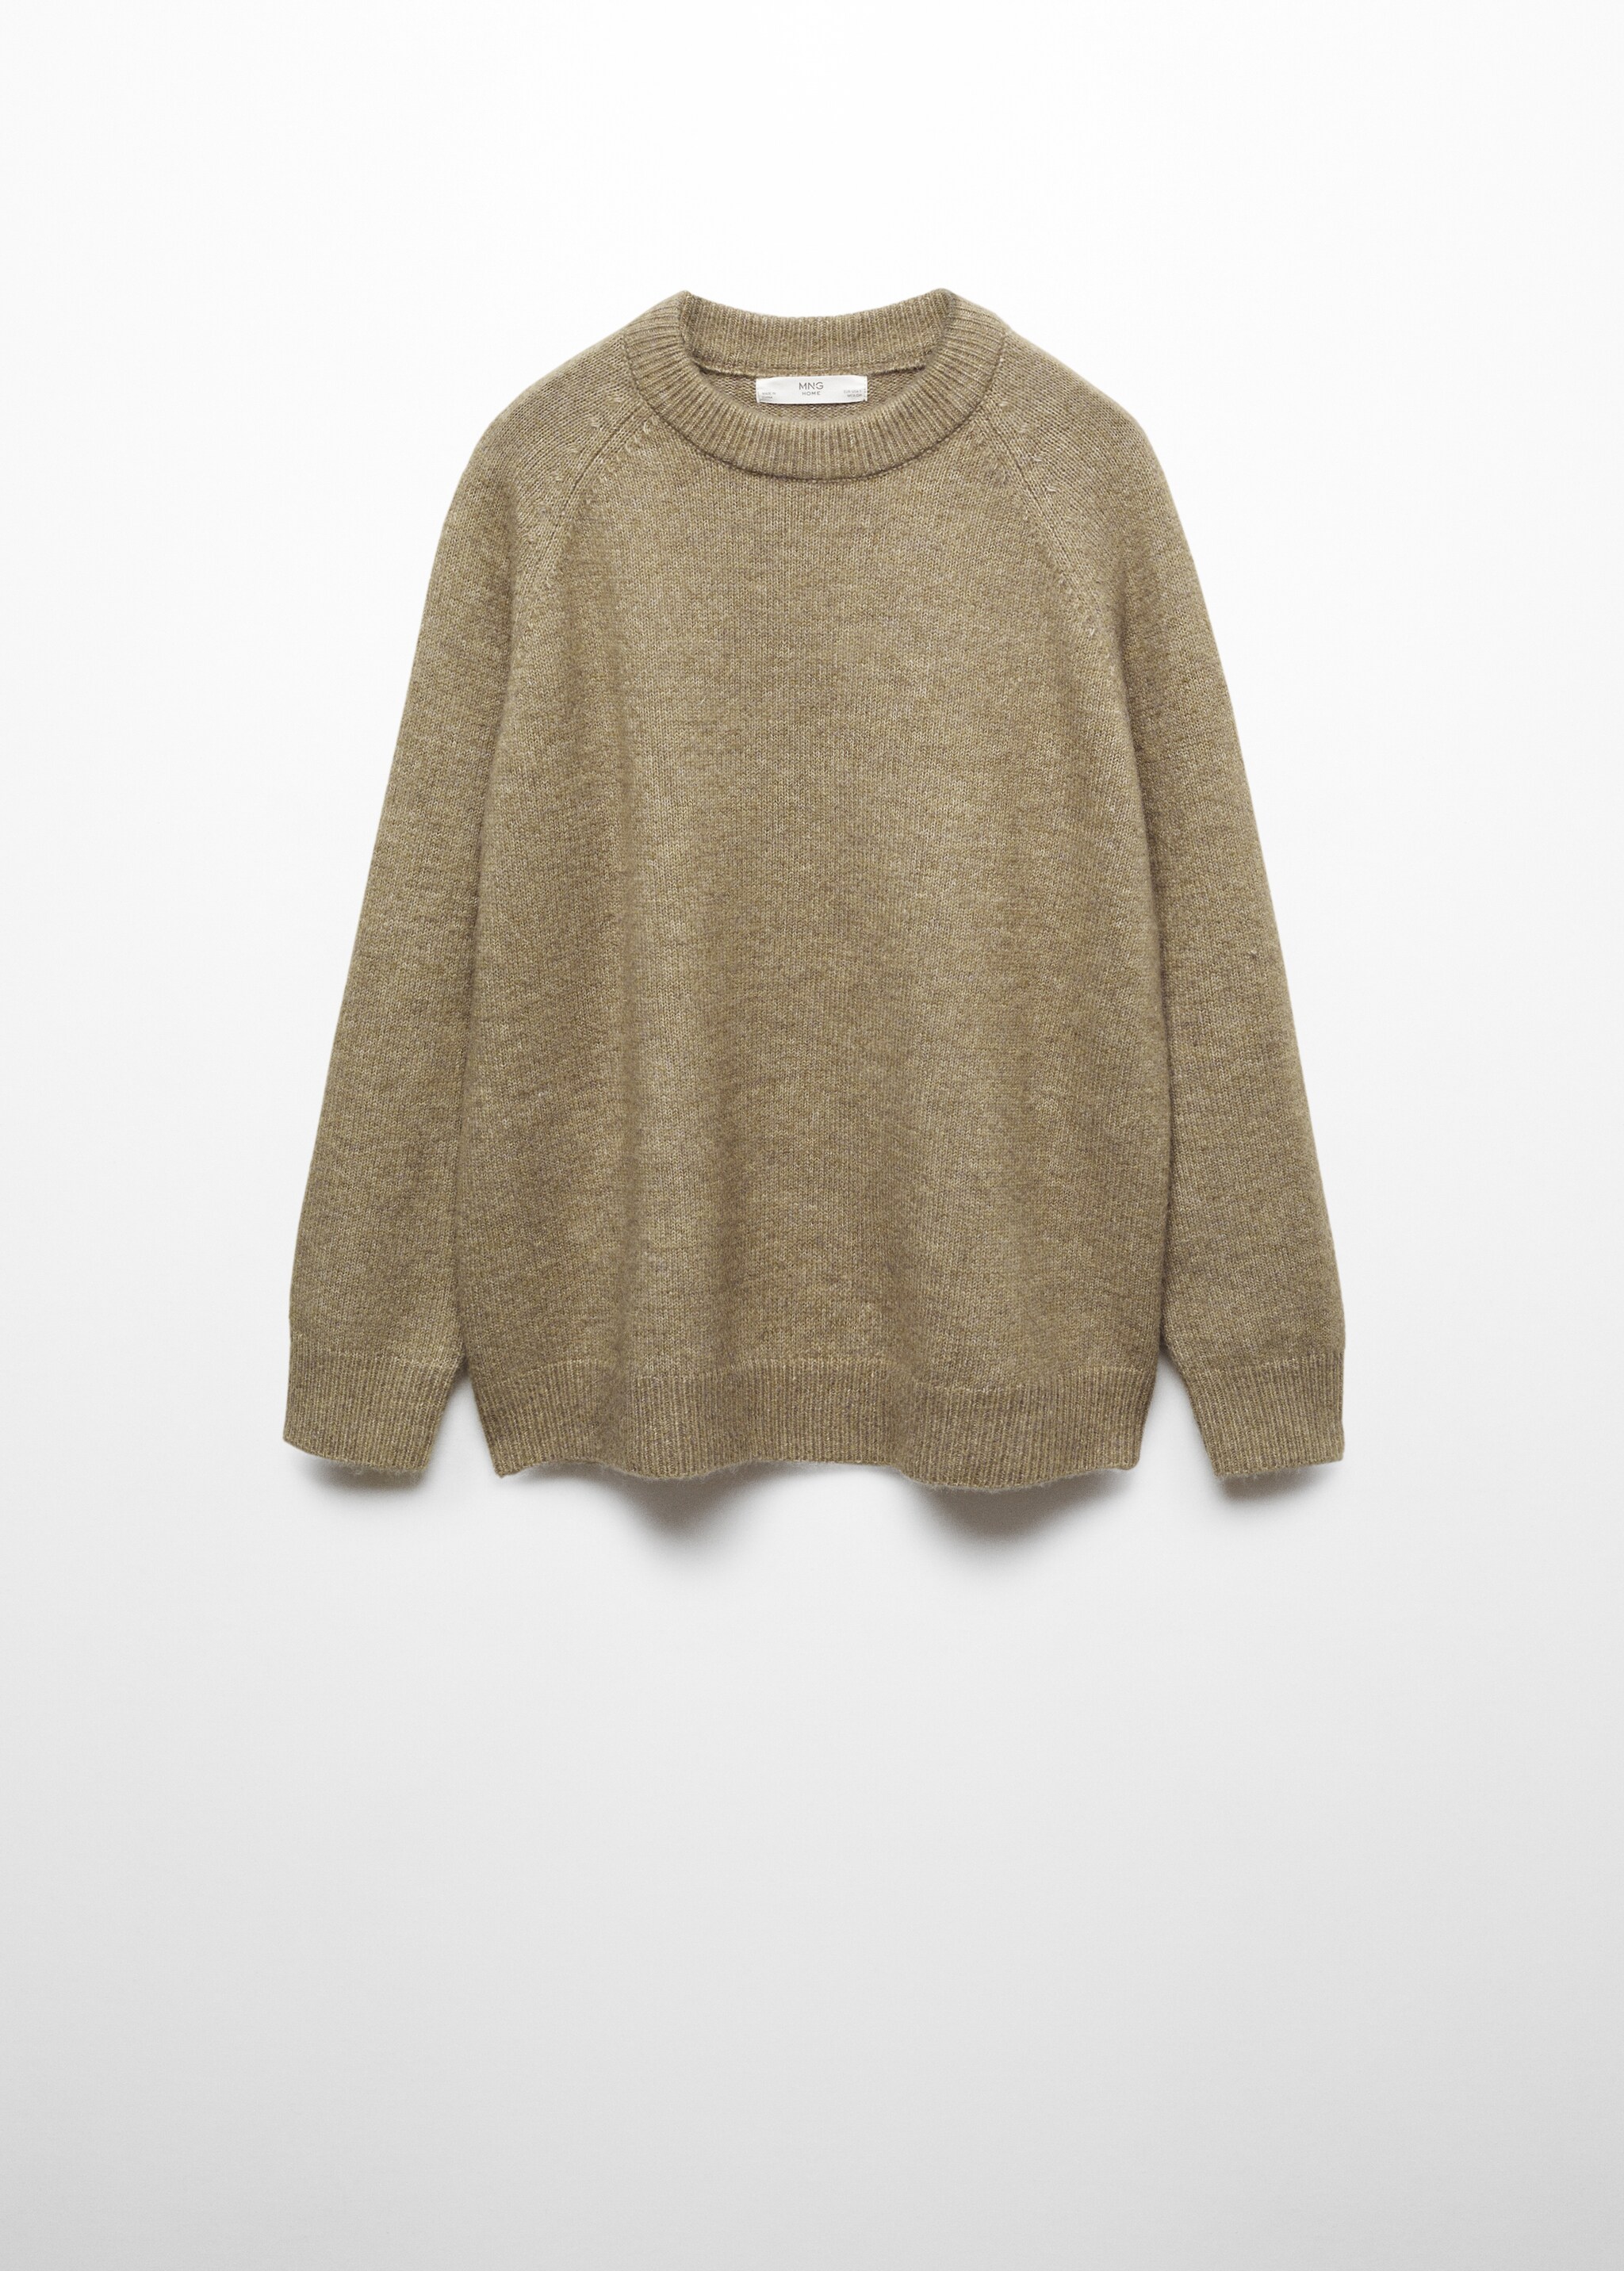 Cotton-linen round-neck knitted sweater - Article without model